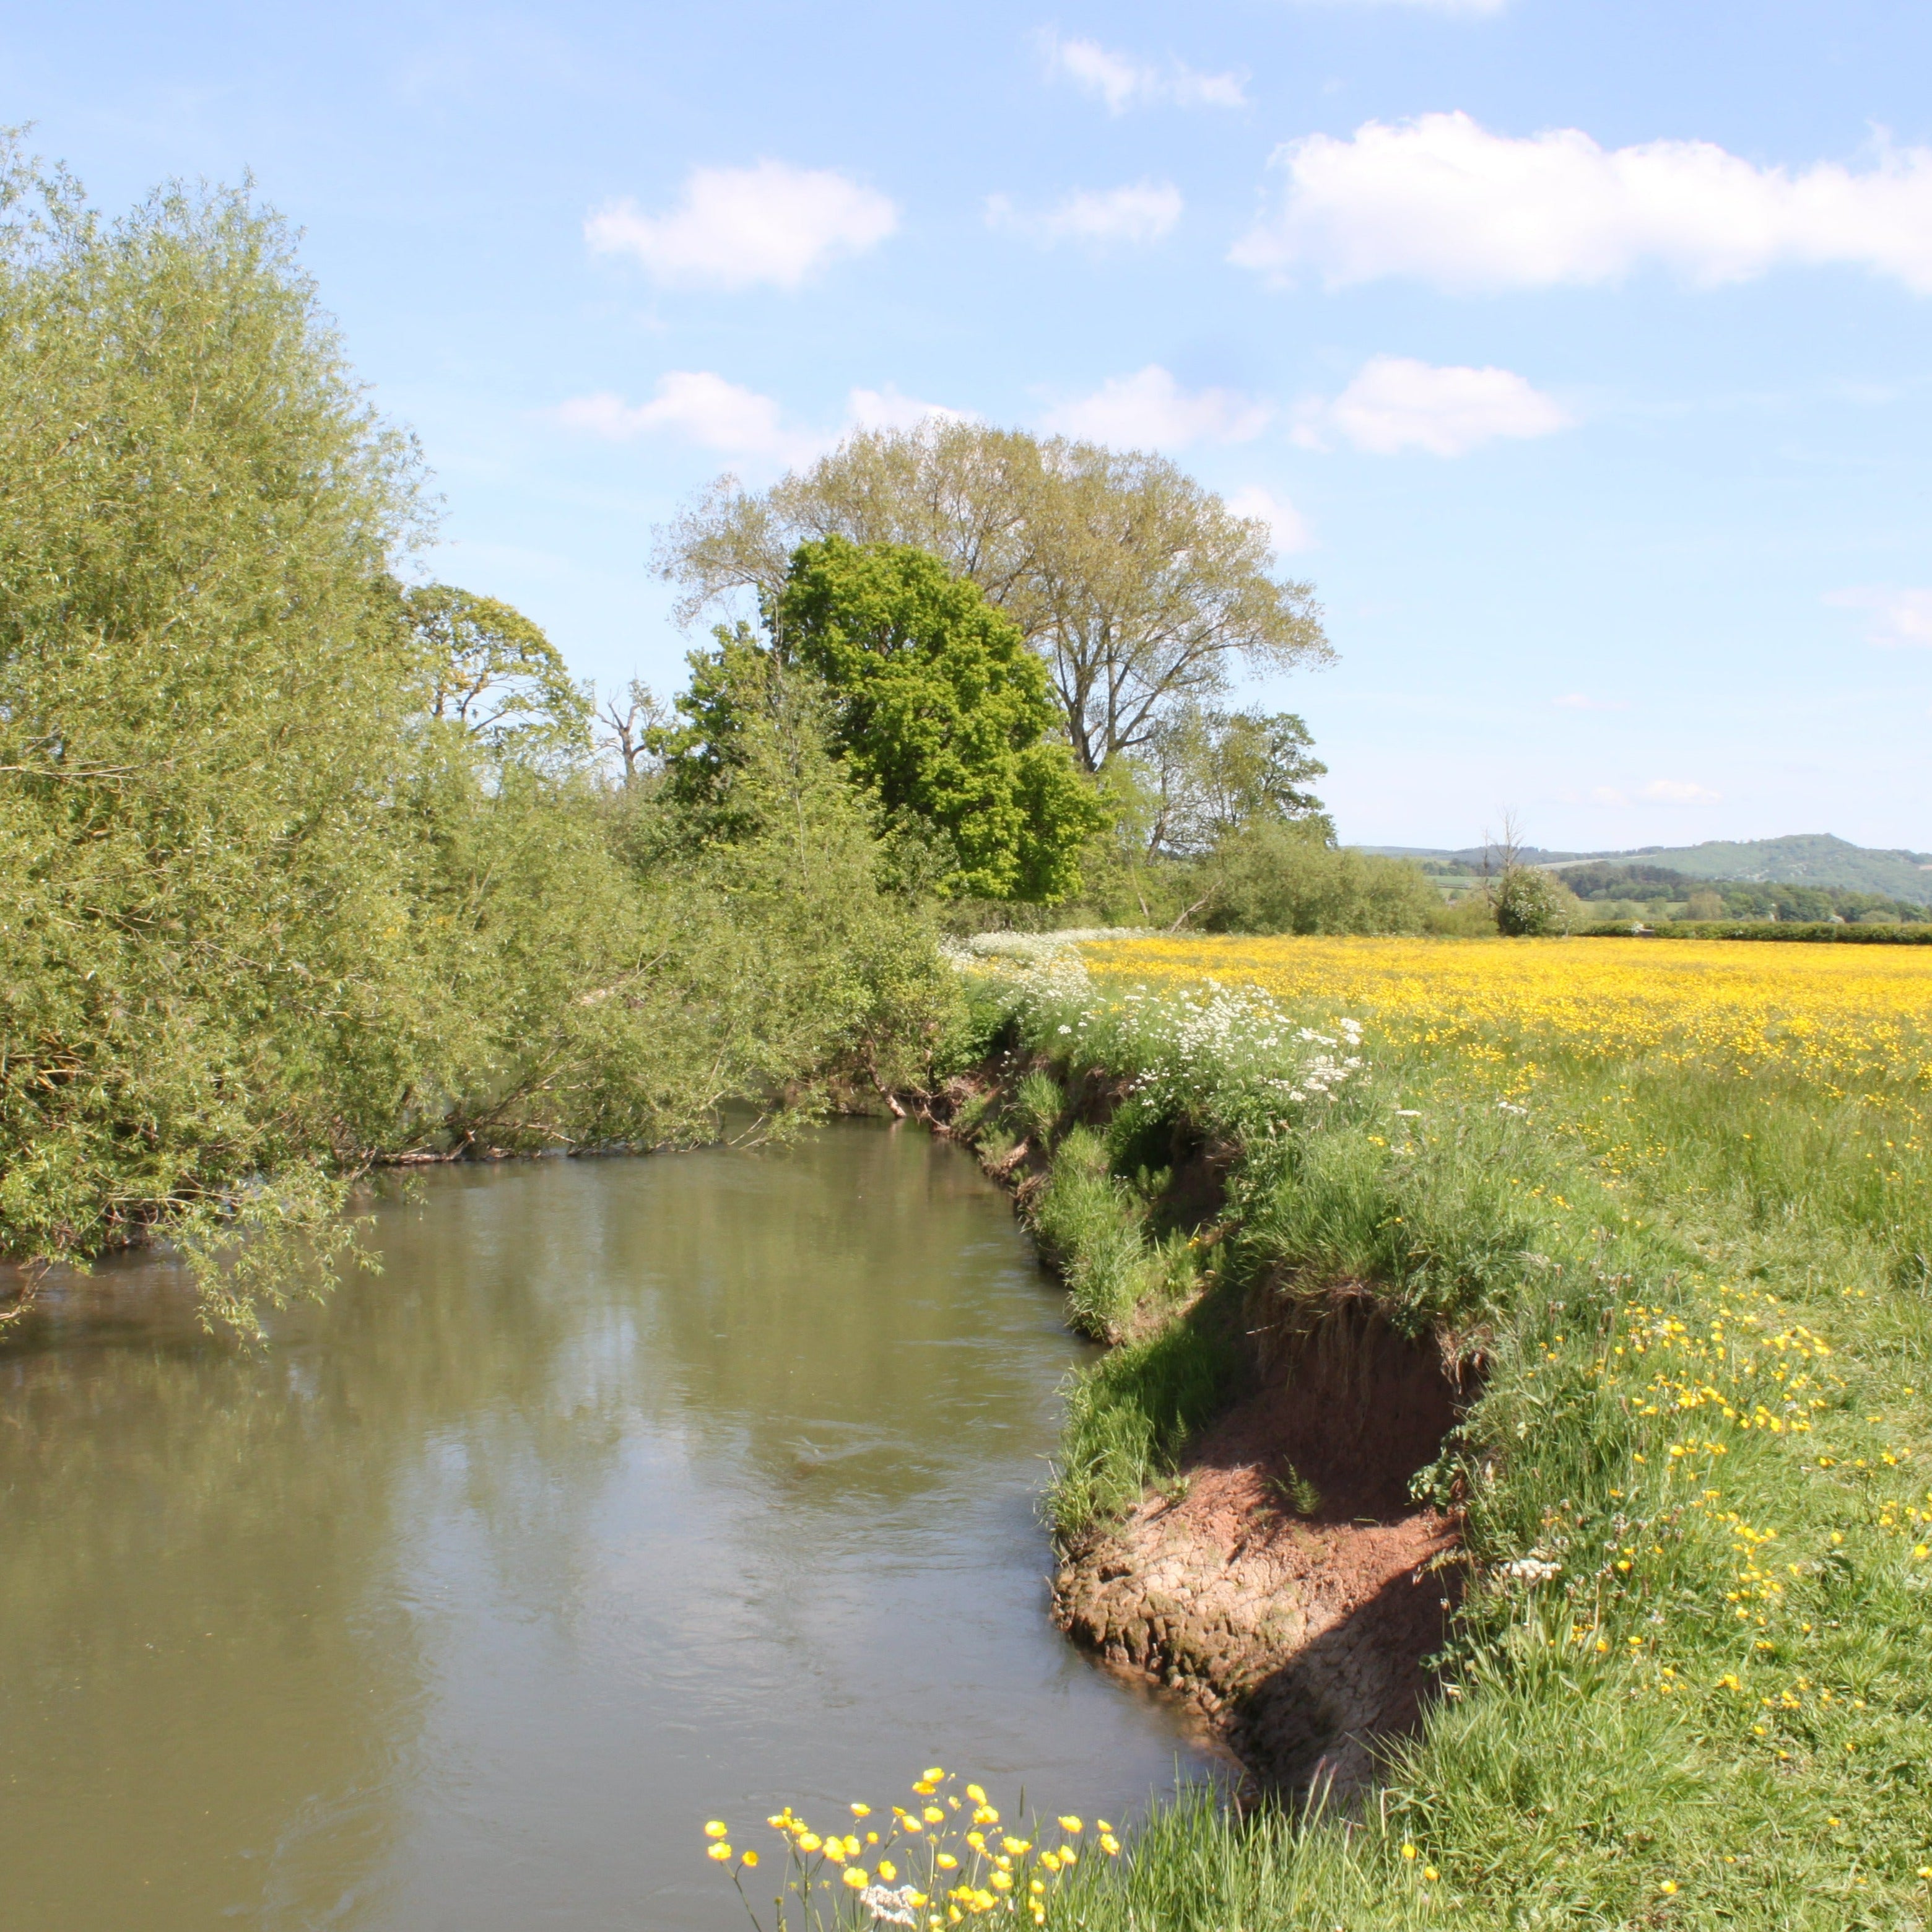 Adopt a Reserve: Lugg Meadow in Herefordshire